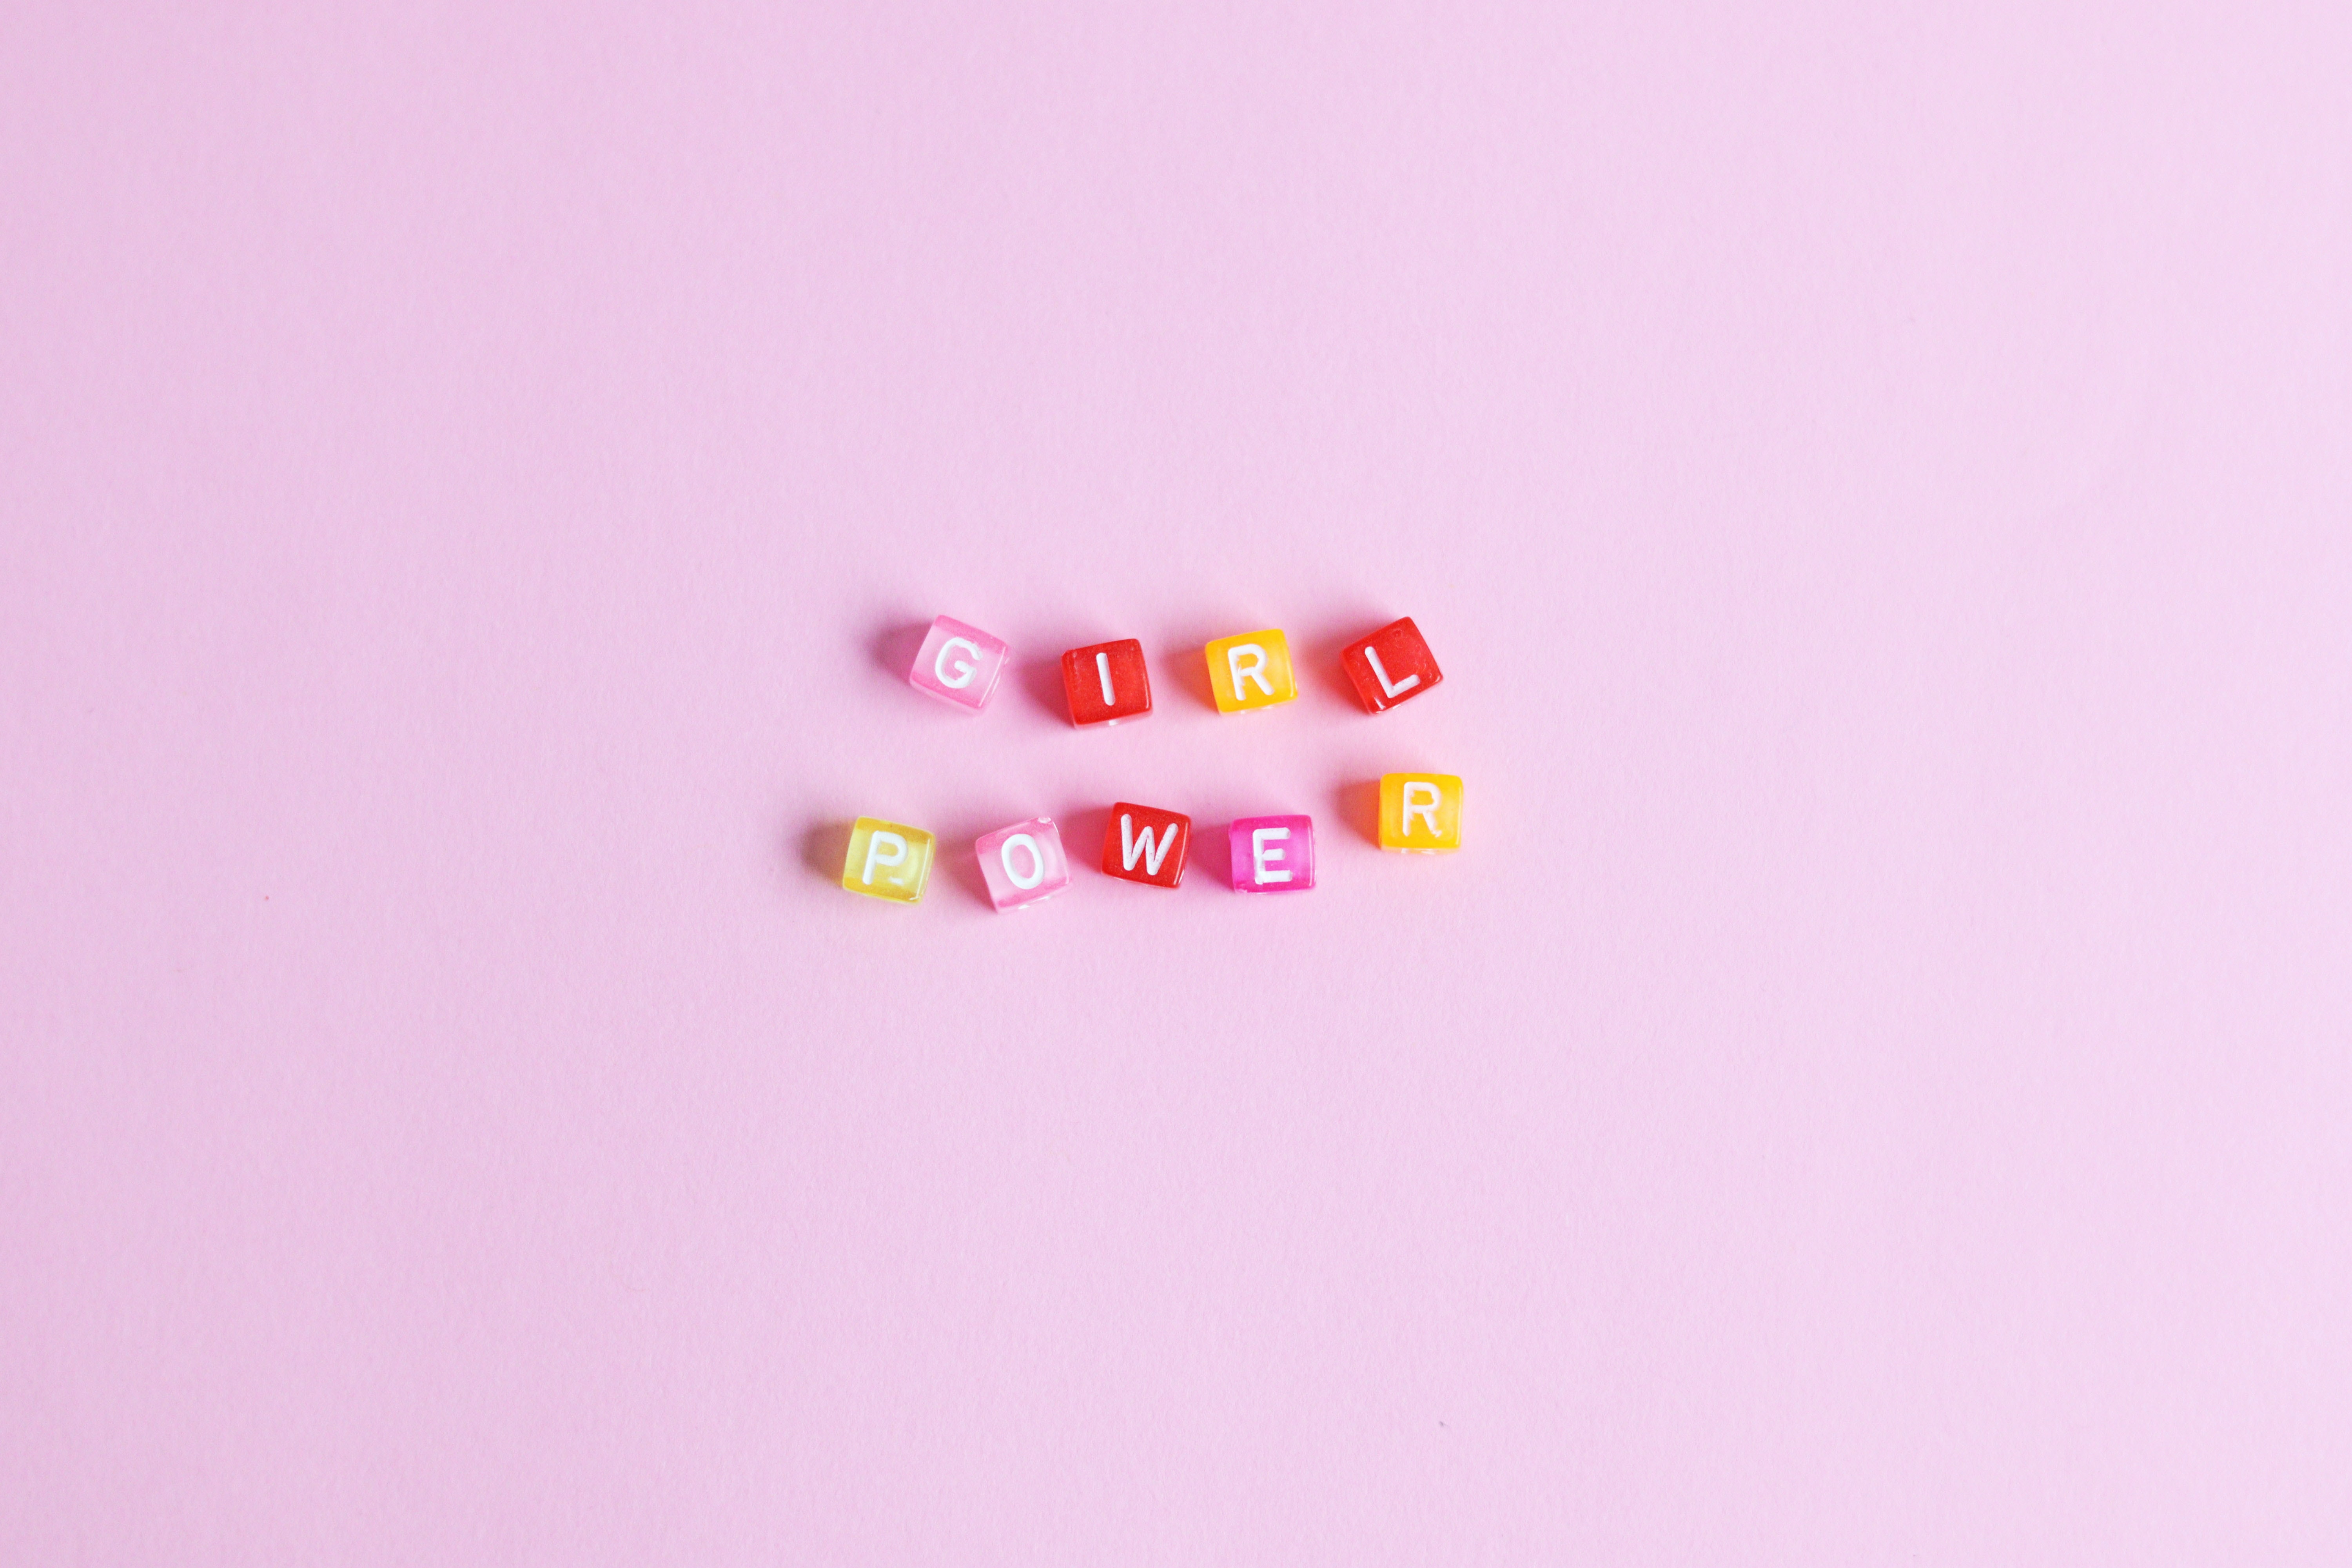 Beads that spell out "girl power".